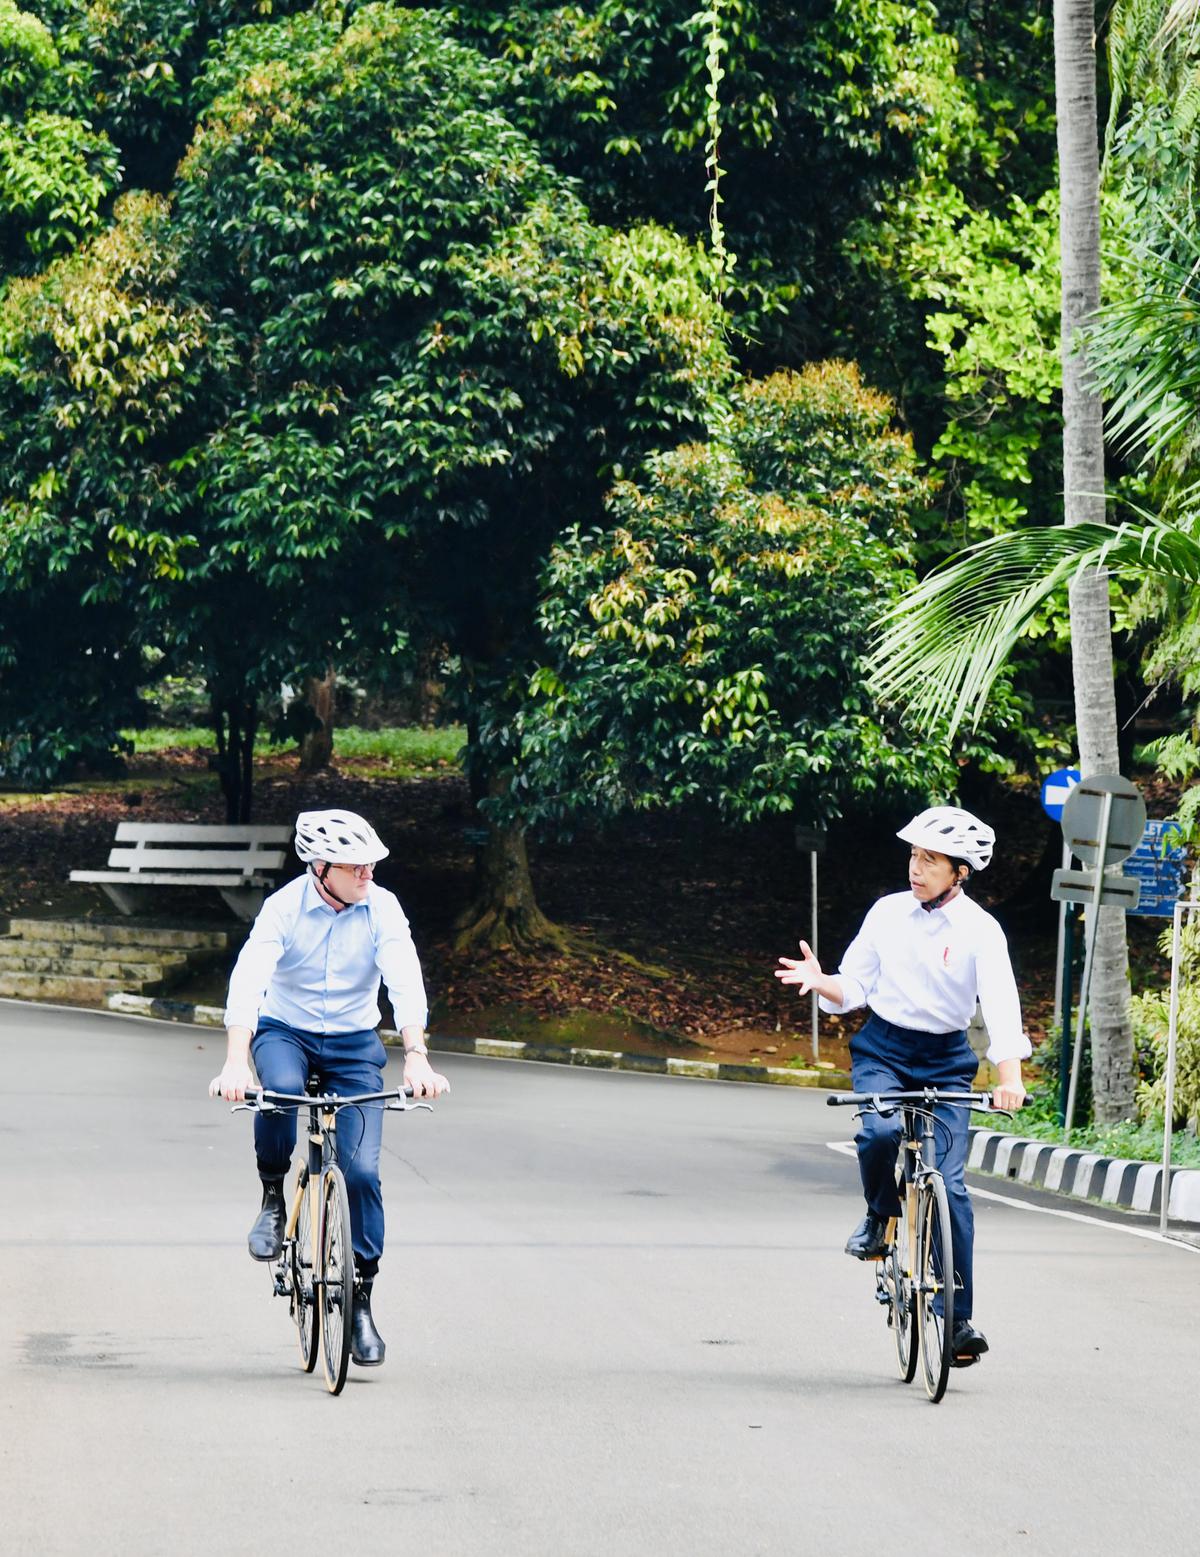 Indonesian President Joko Widodo (right) cycles with Australian prime minister Anthony Albanese in Bogor Presidential palace during the latter’s visit to the country.